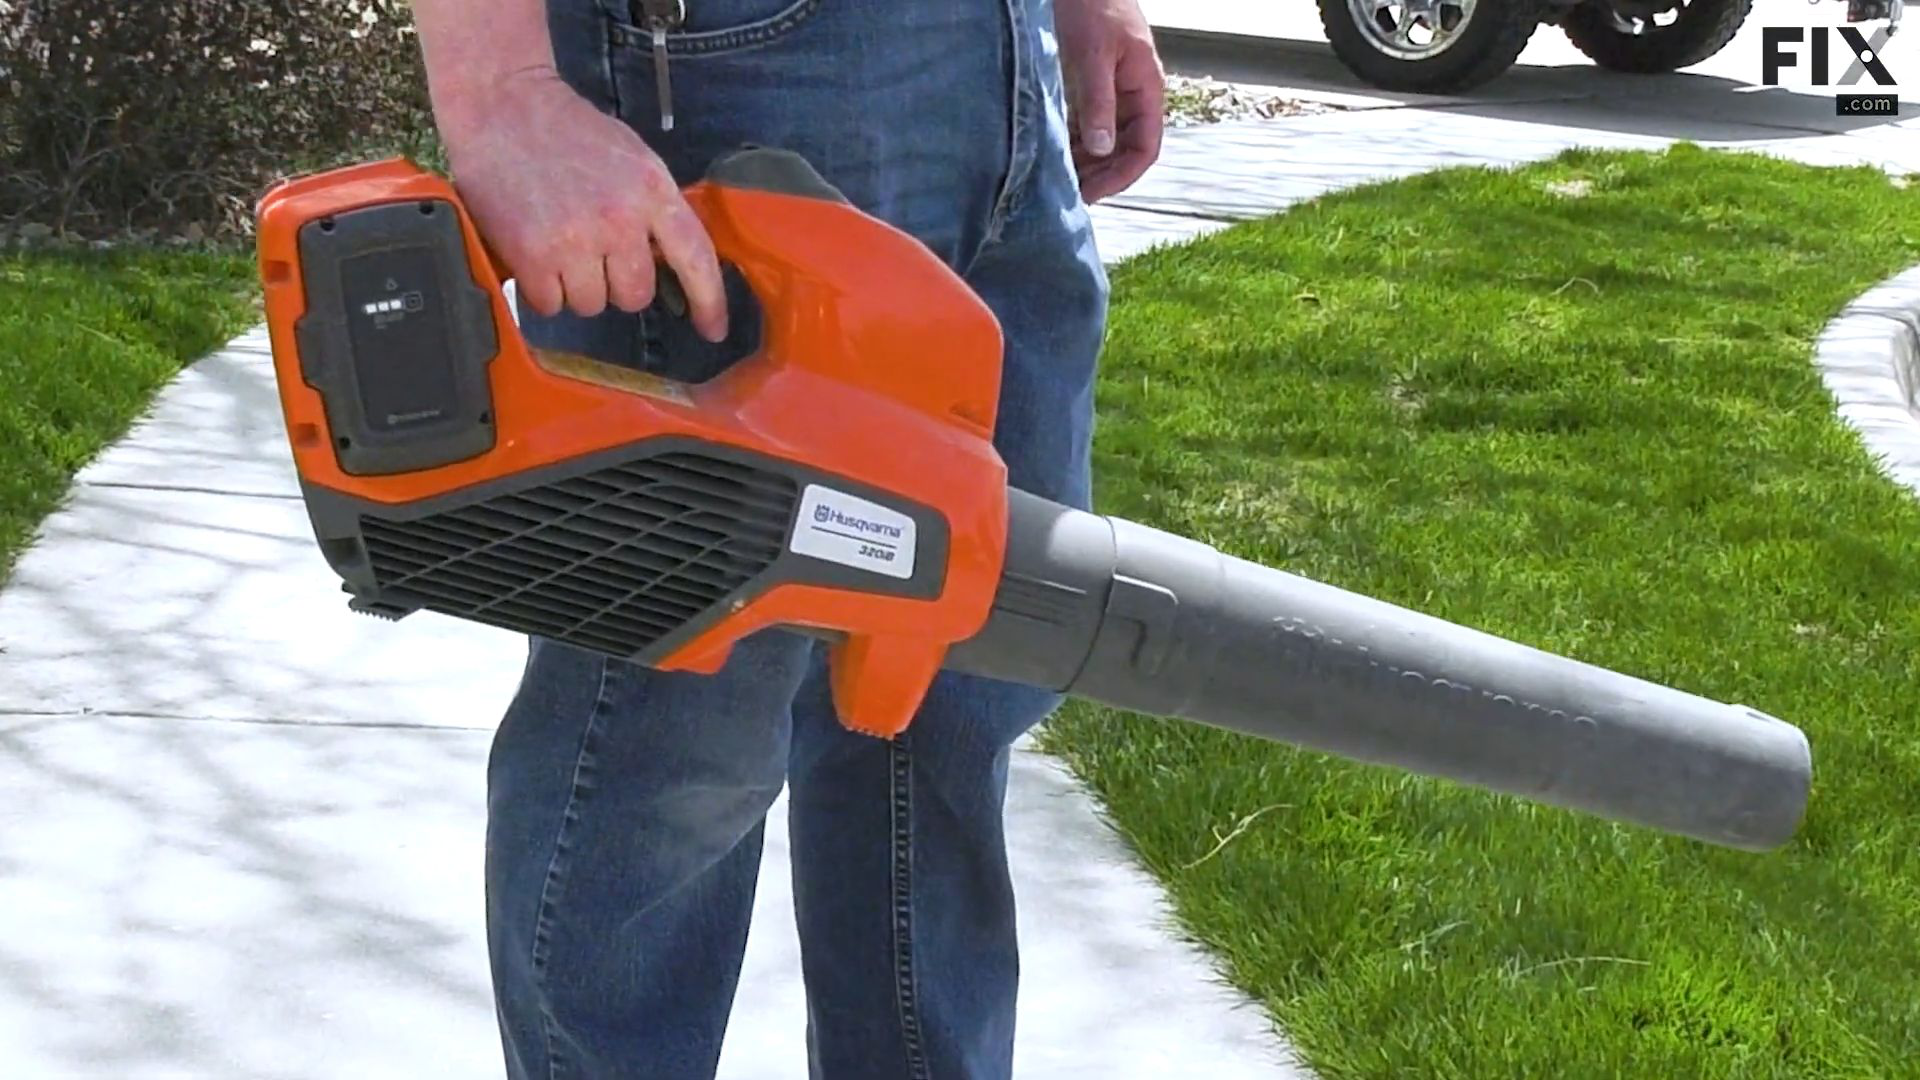 Man standing on a pavement in a suburban neighborhood while carrying a small, orange, handheld leaf blower model